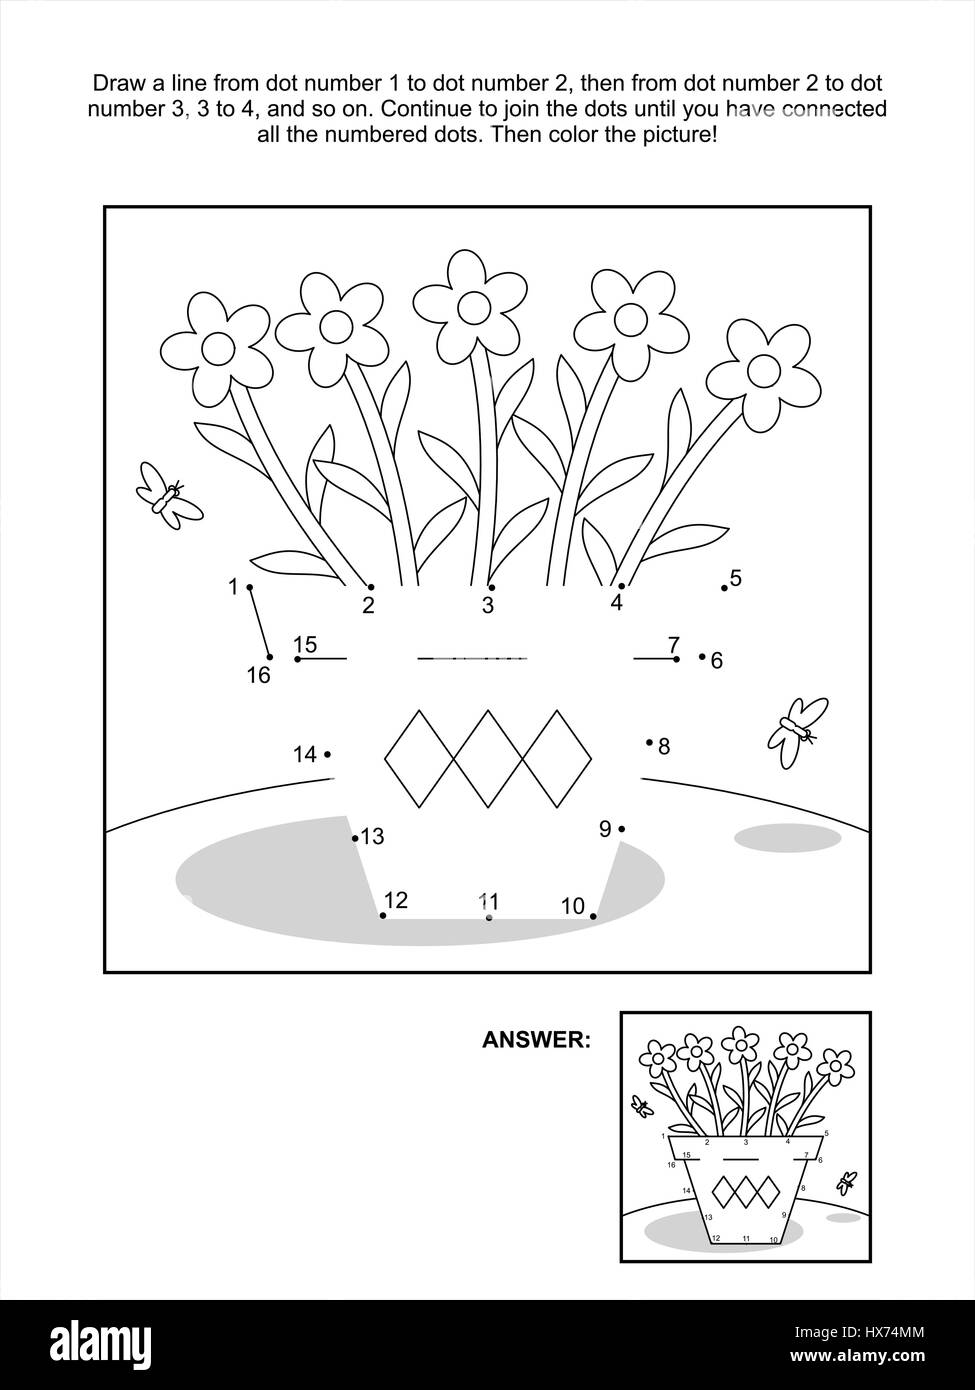 Connect the dots picture puzzle and coloring page - flower pot, flowers, butterflies. Answer included. Stock Vector